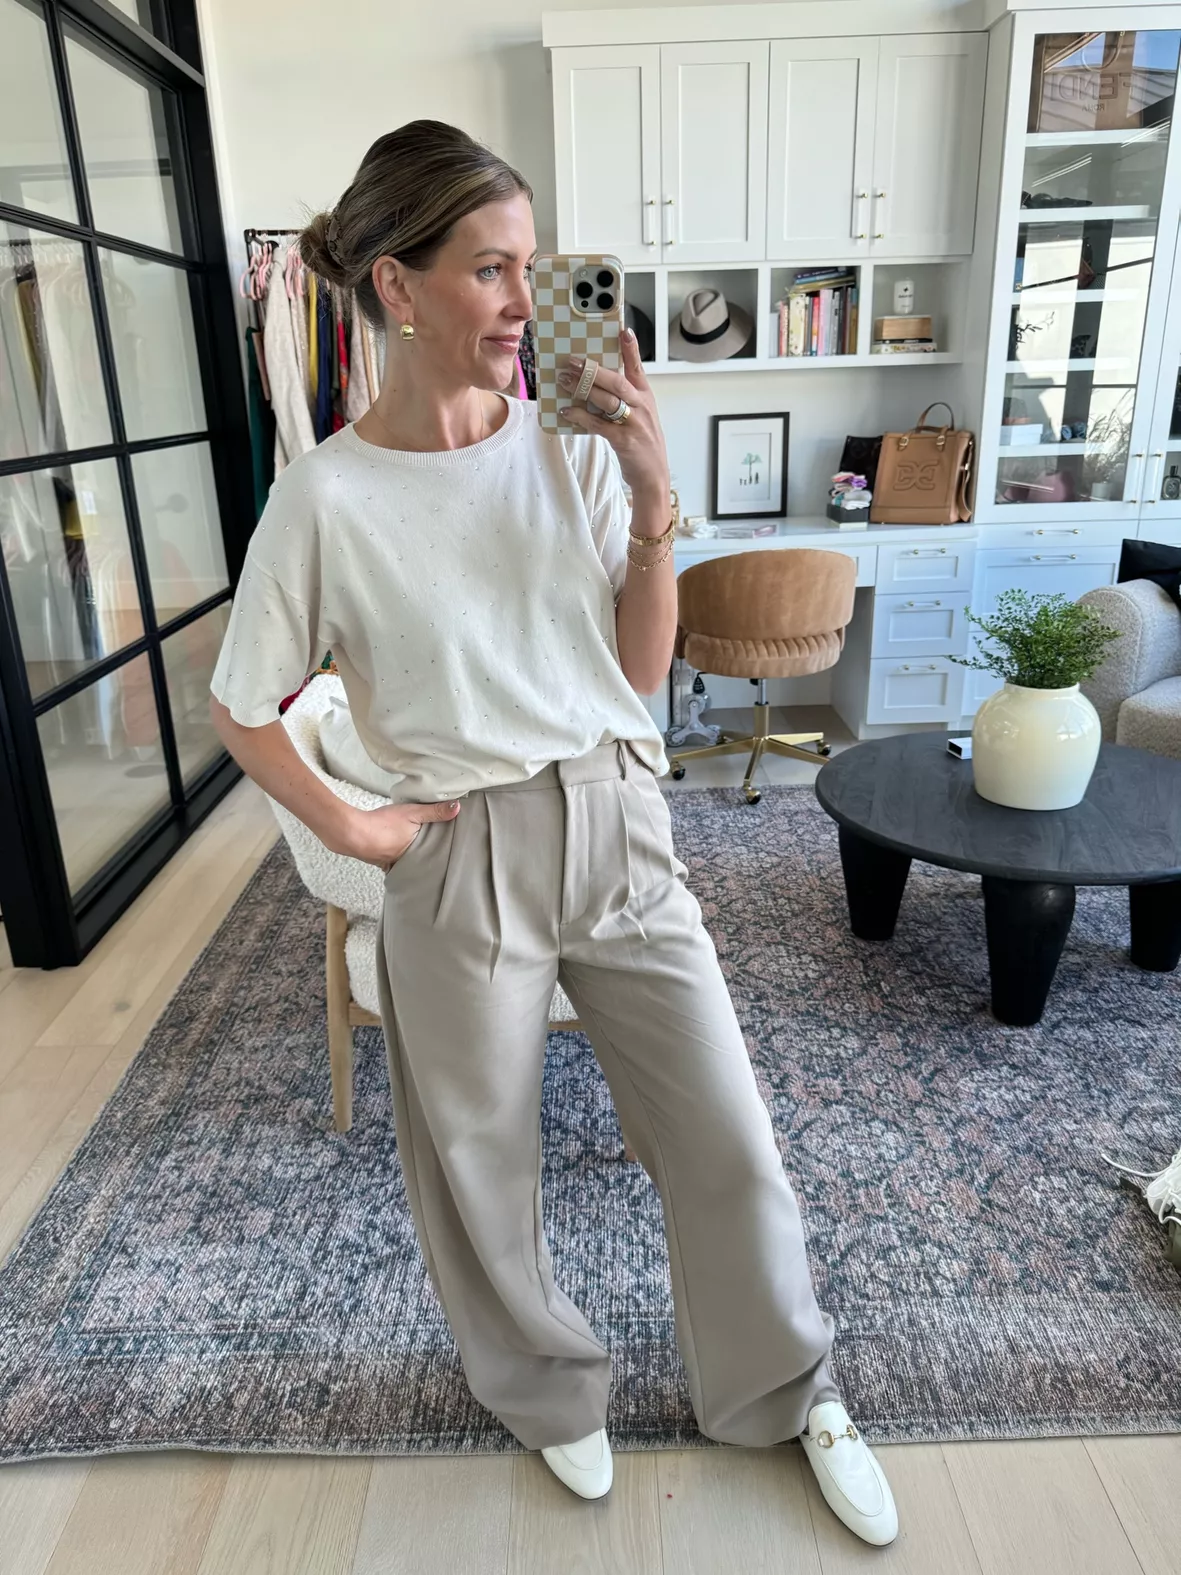 Styling my favorite pants- the Sloane Tailored Pants from